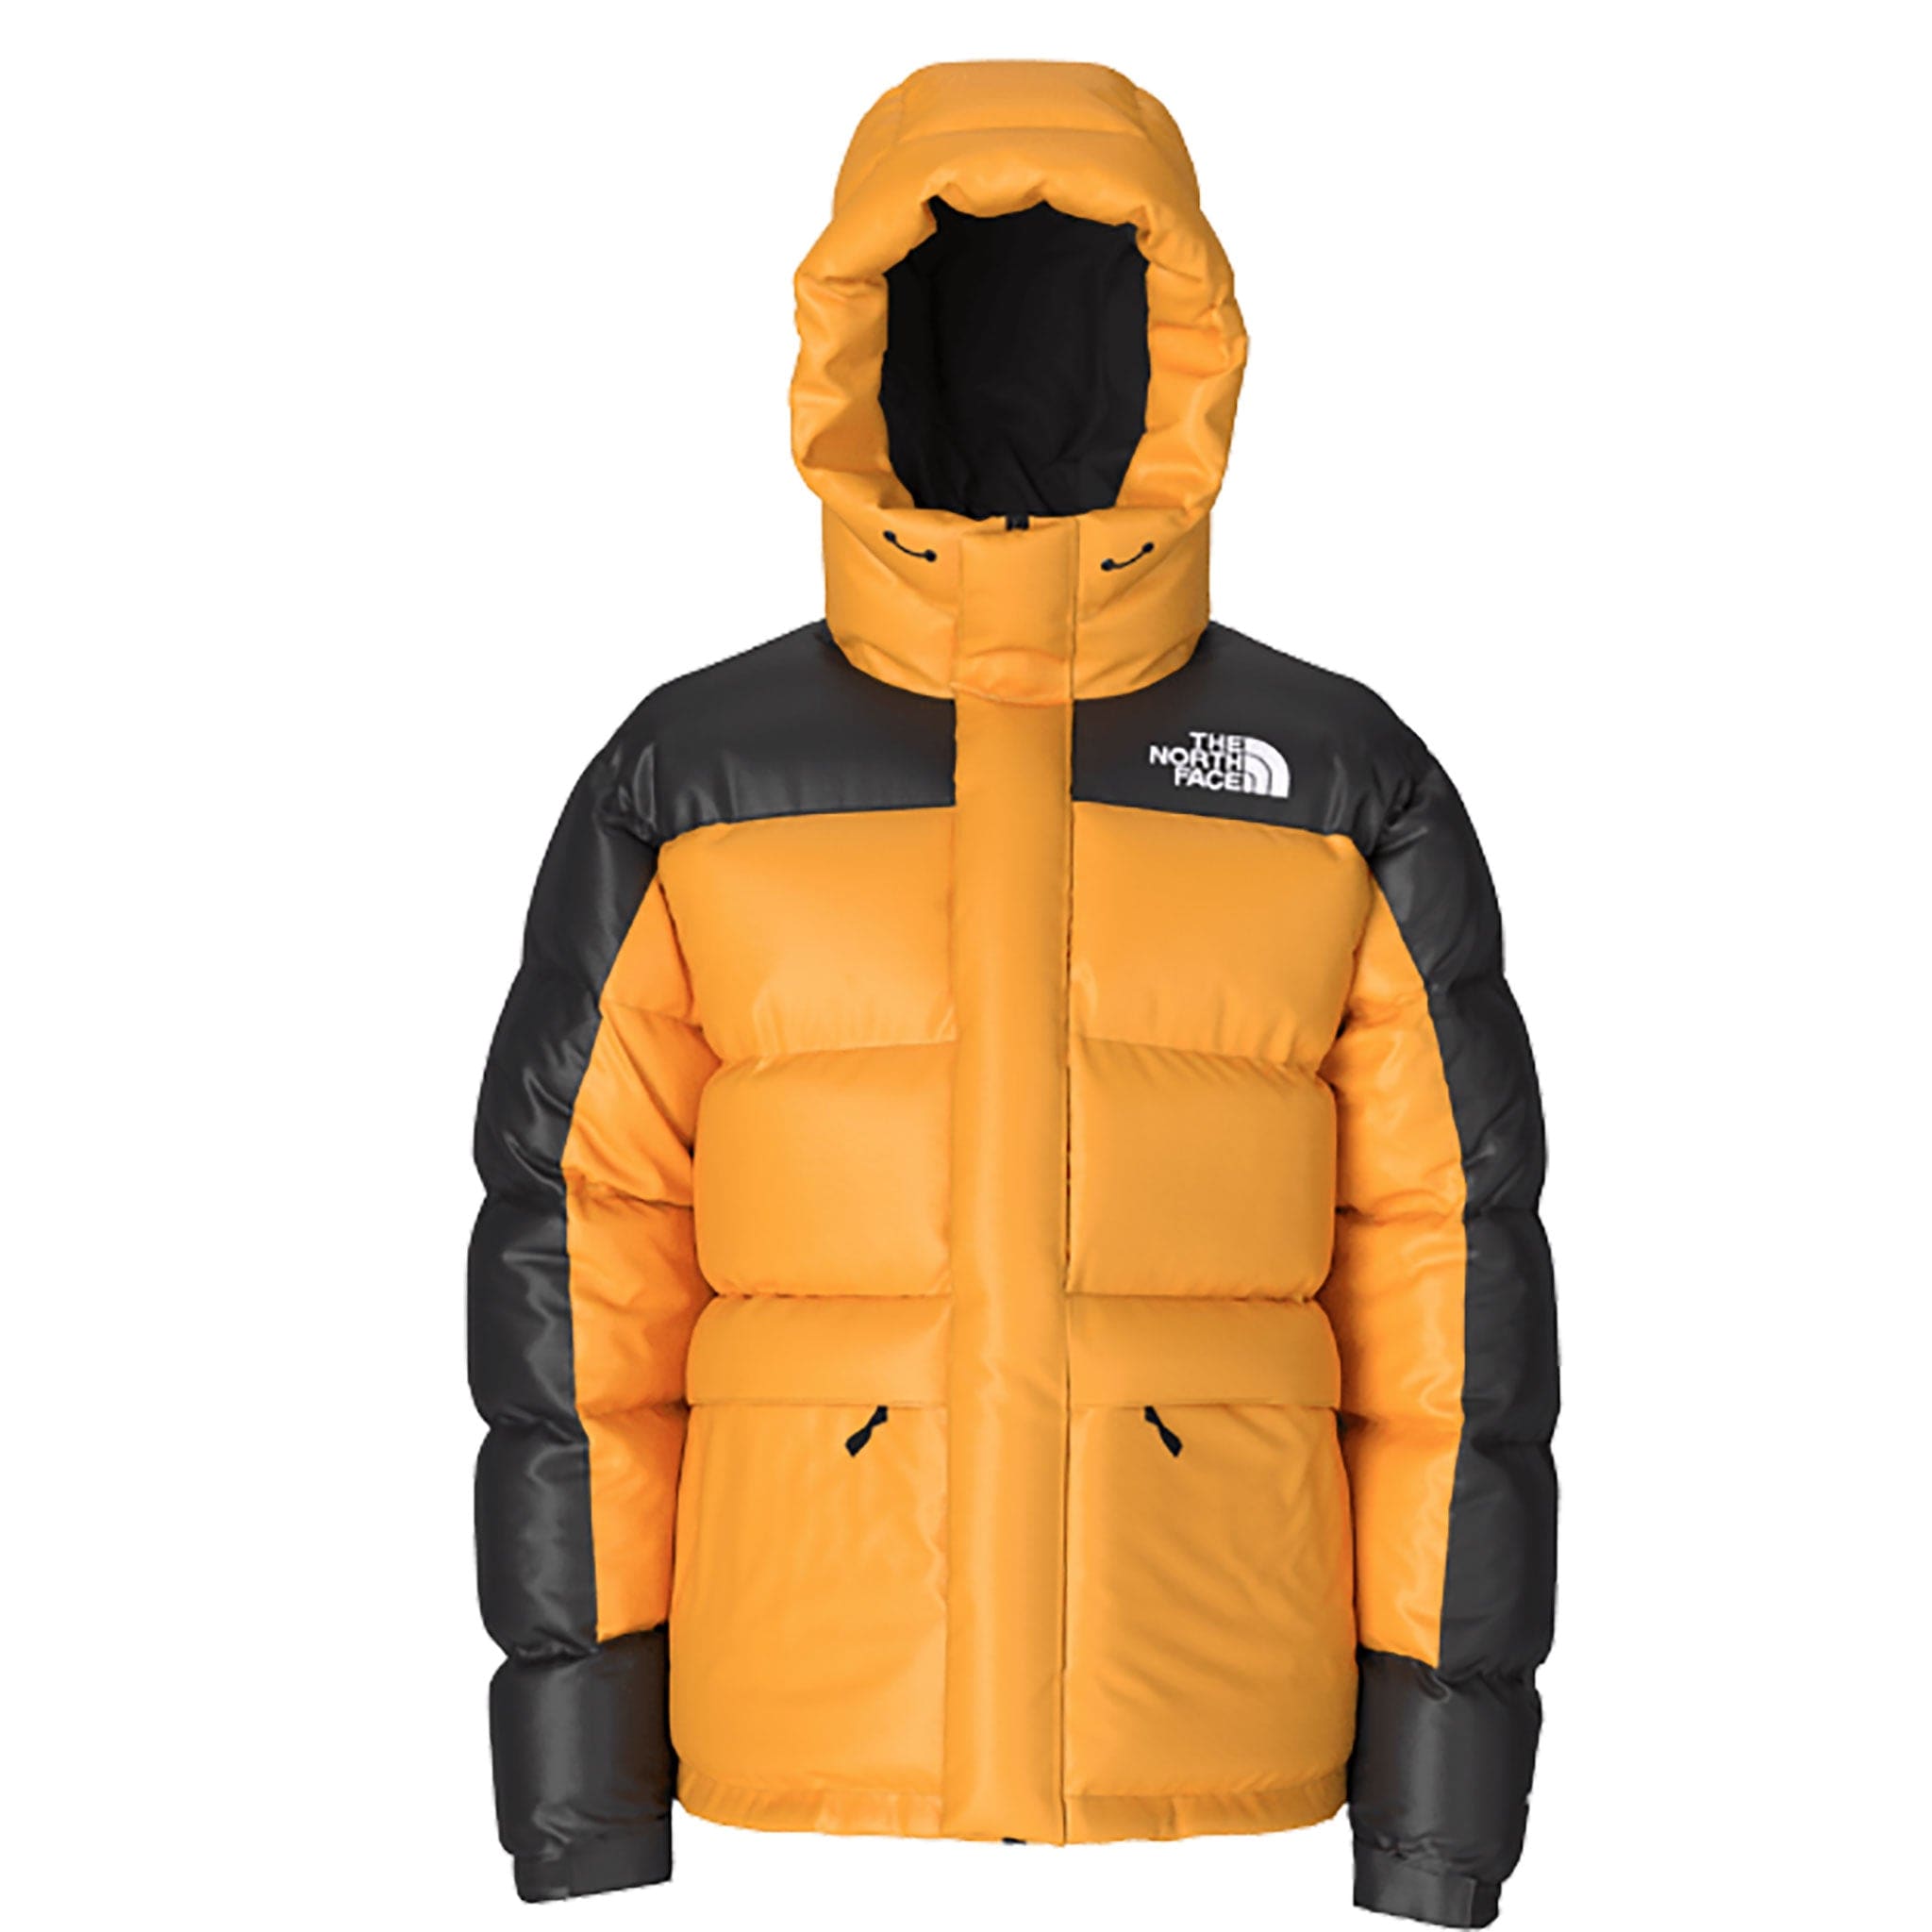 Black The North Face Himalayan Insulated Jacket